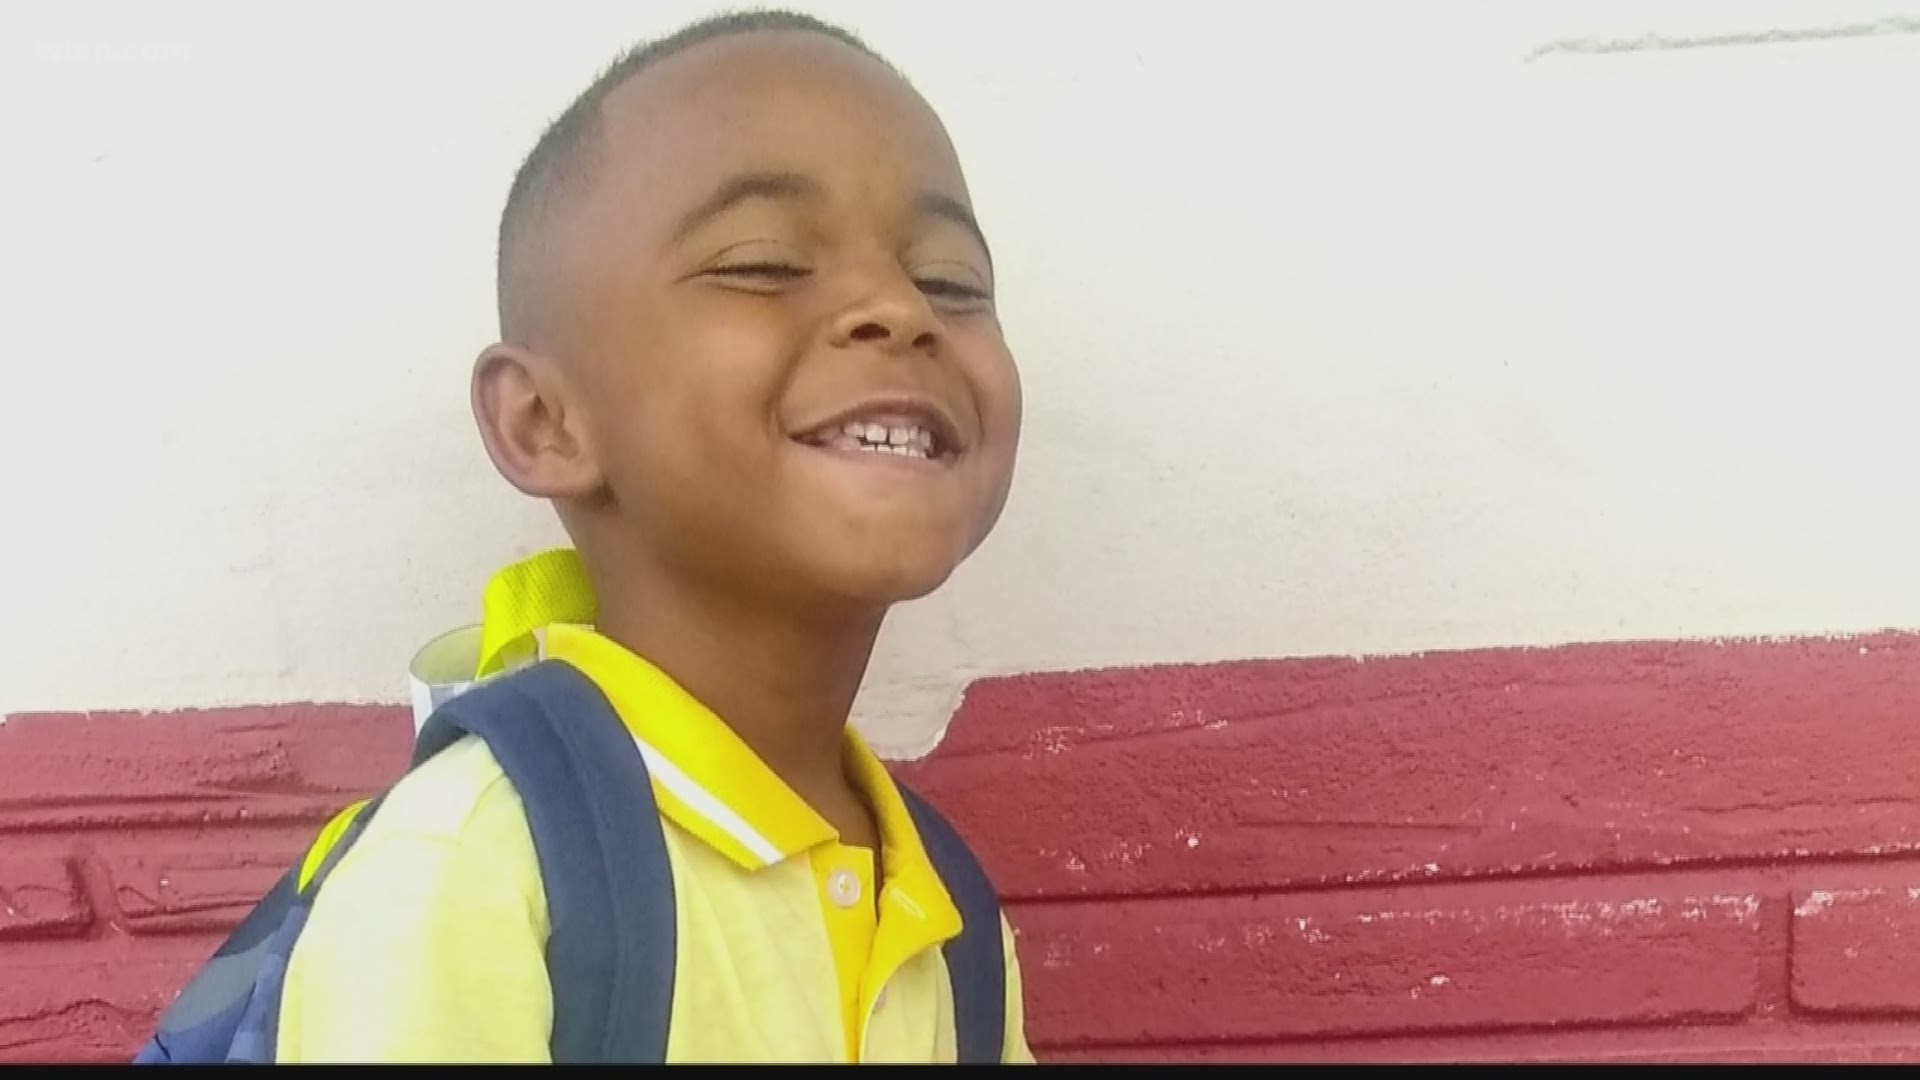 Jennifer Moore said her son Joseph was left in the middle of the street after being hit and dragged by a truck. 

"Looking and seeing my baby in the middle of the road, surrounded by people that were trying to help him. I thought my worst fear. That my baby was gone," Moore said.

The 4-year-old had just gotten off the bus at the wrong stop and was trying to make his way home.